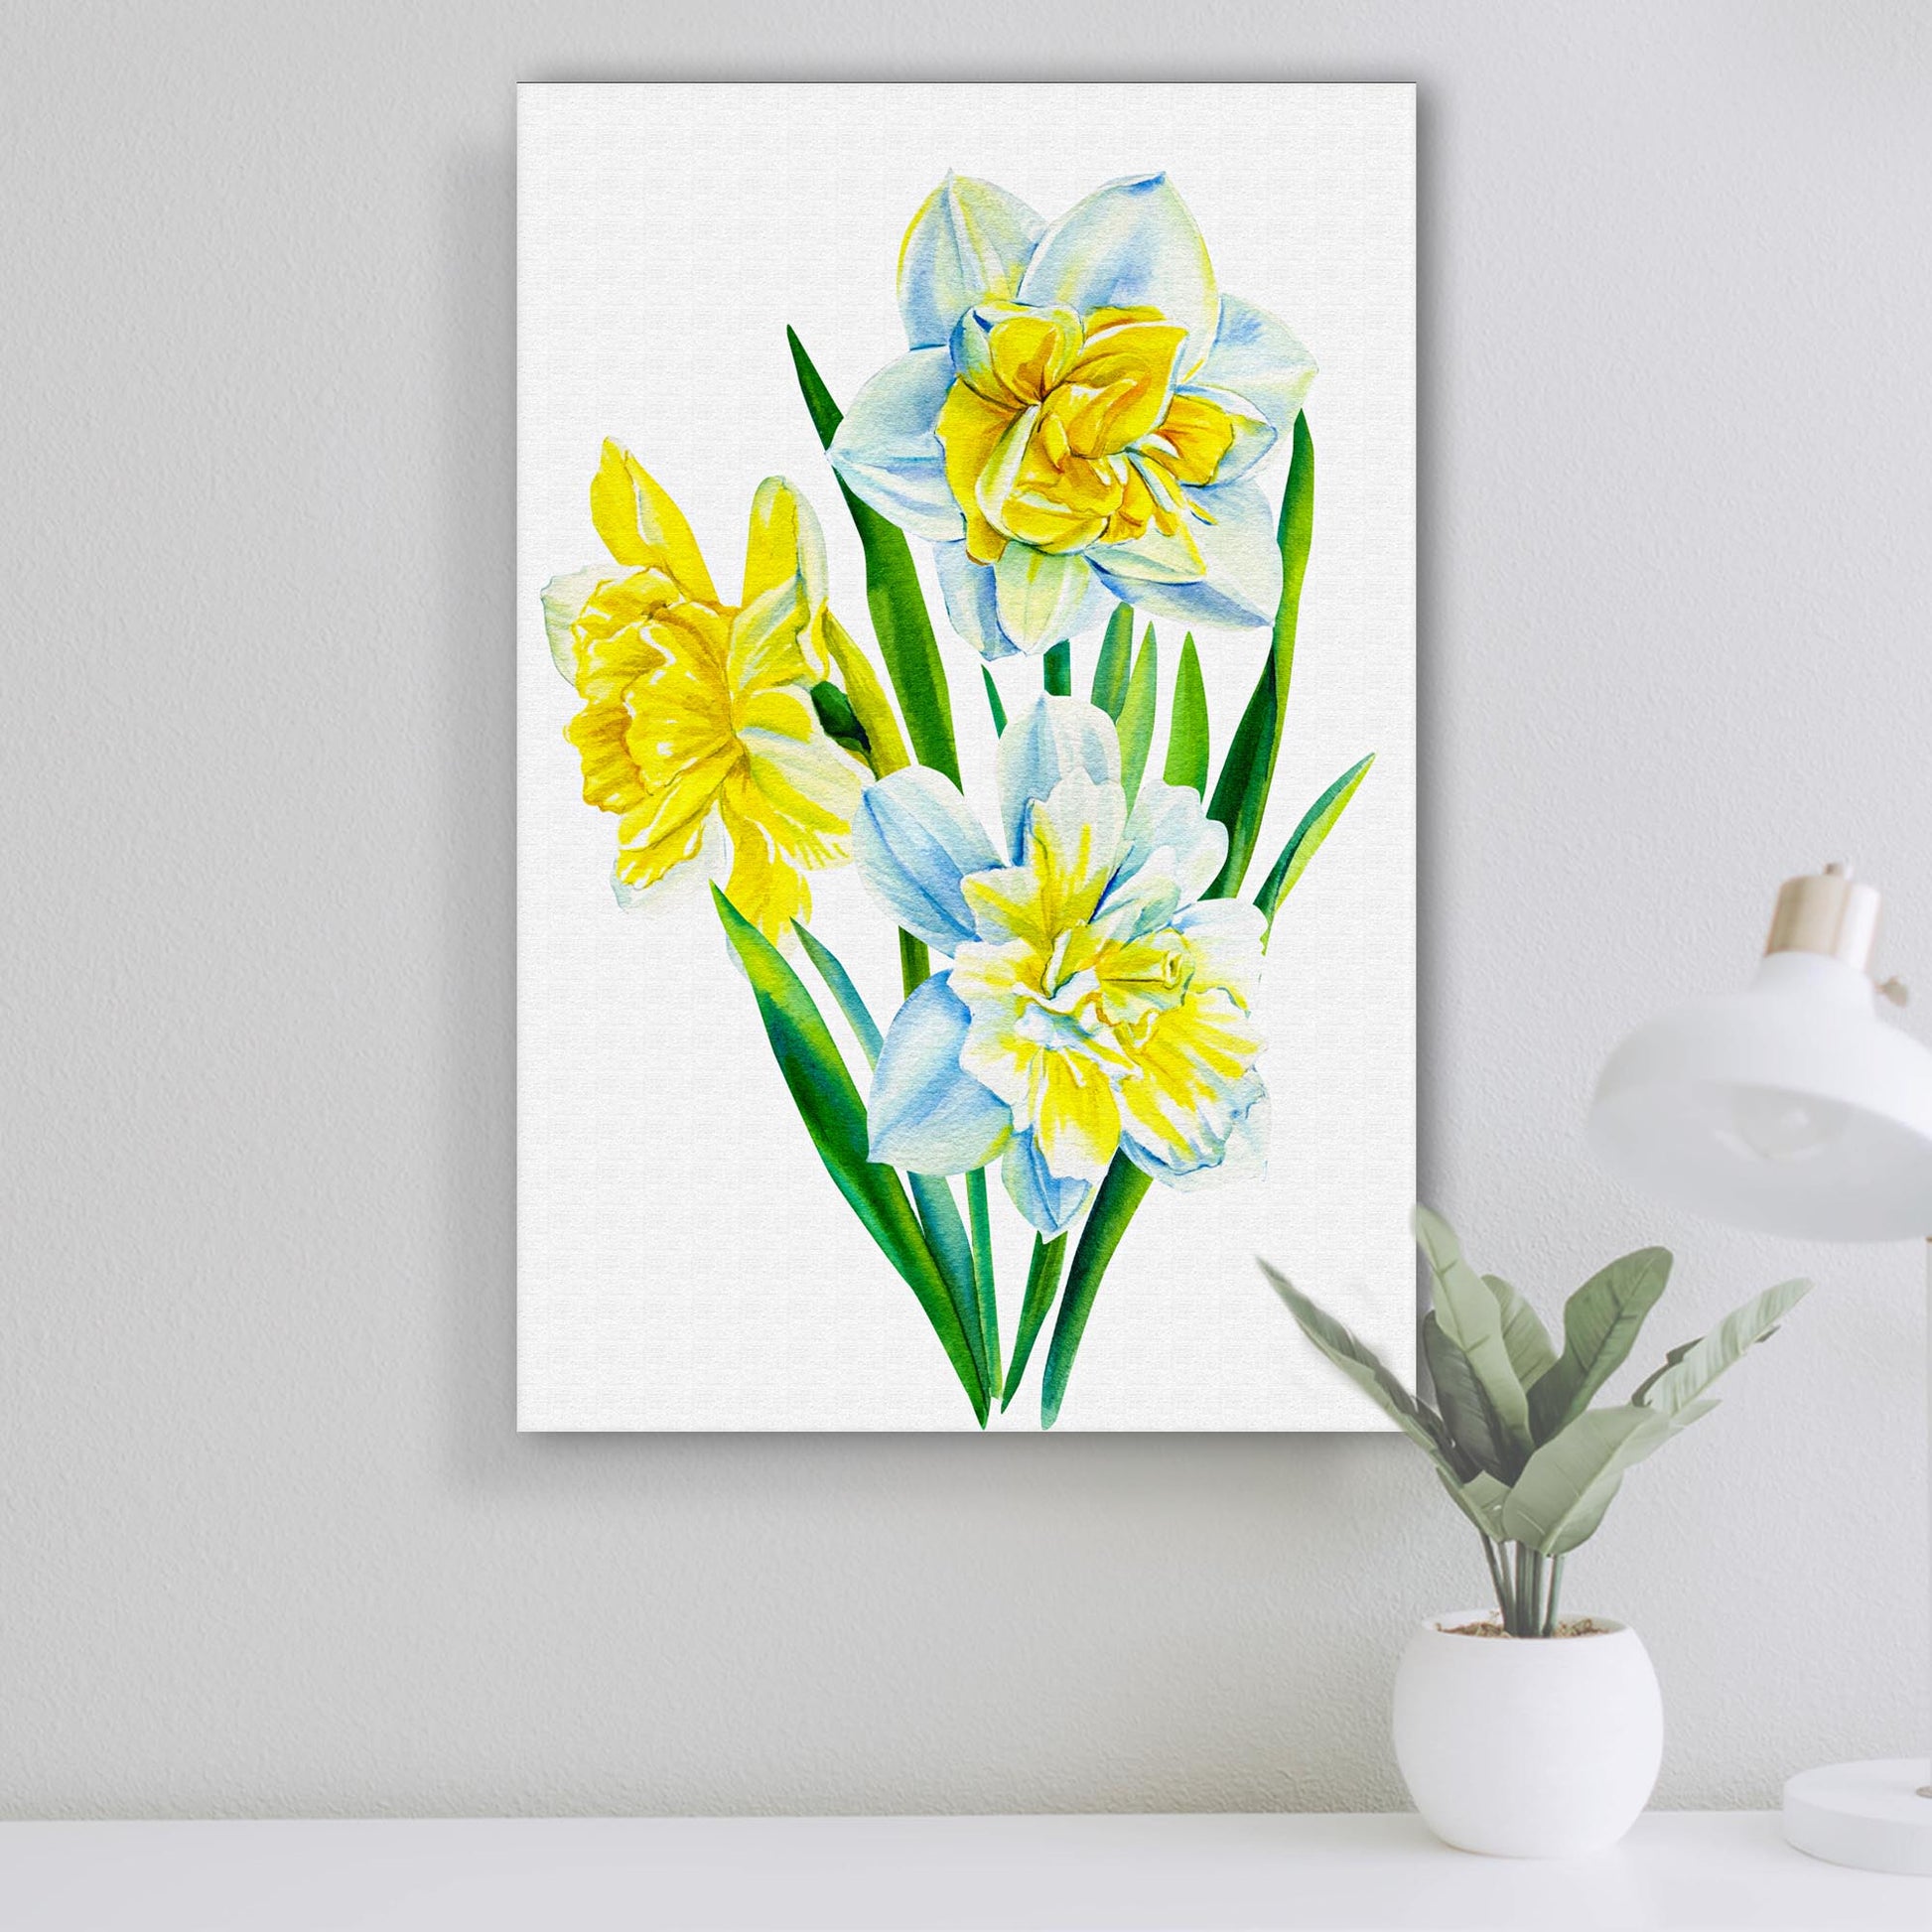 Flowers Daffodils Watercolor Canvas Wall Art Style 1 - Image by Tailored Canvases